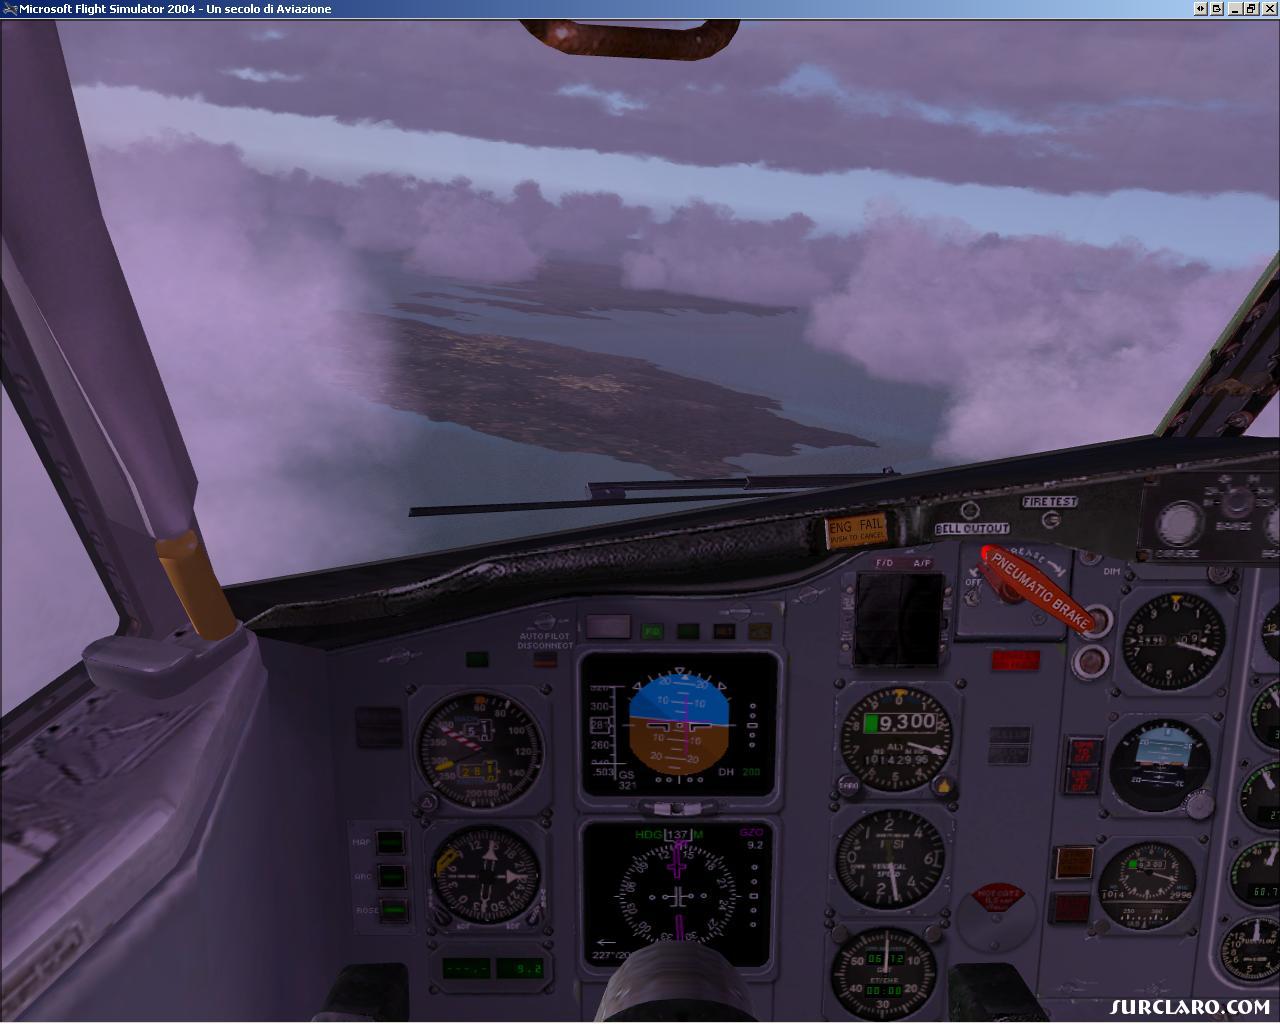 dealing with some crosswinds while intercepting the ILS runway 14 @ LMML (Malta) - Photo 15470